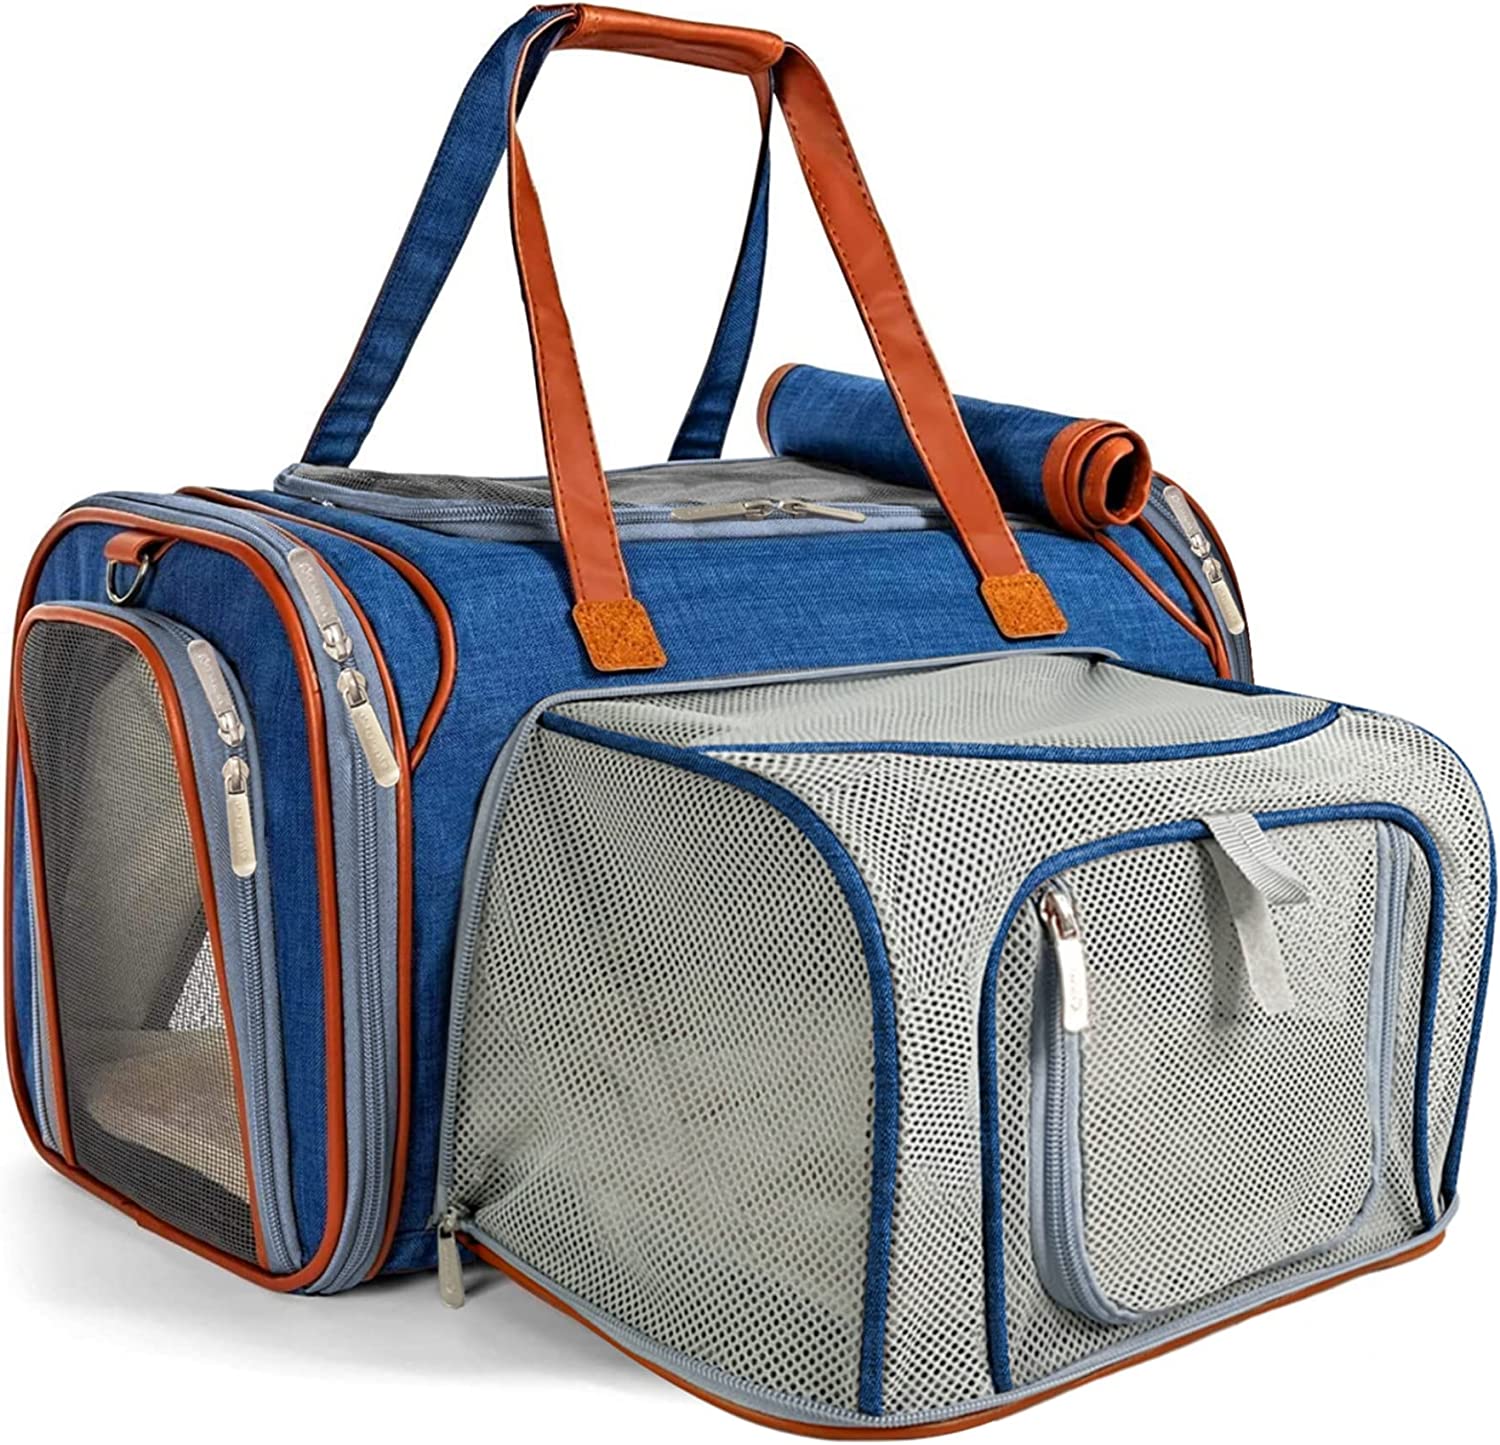 4. Mr. Peanut's Expandable Airline Approved Cat Carrier